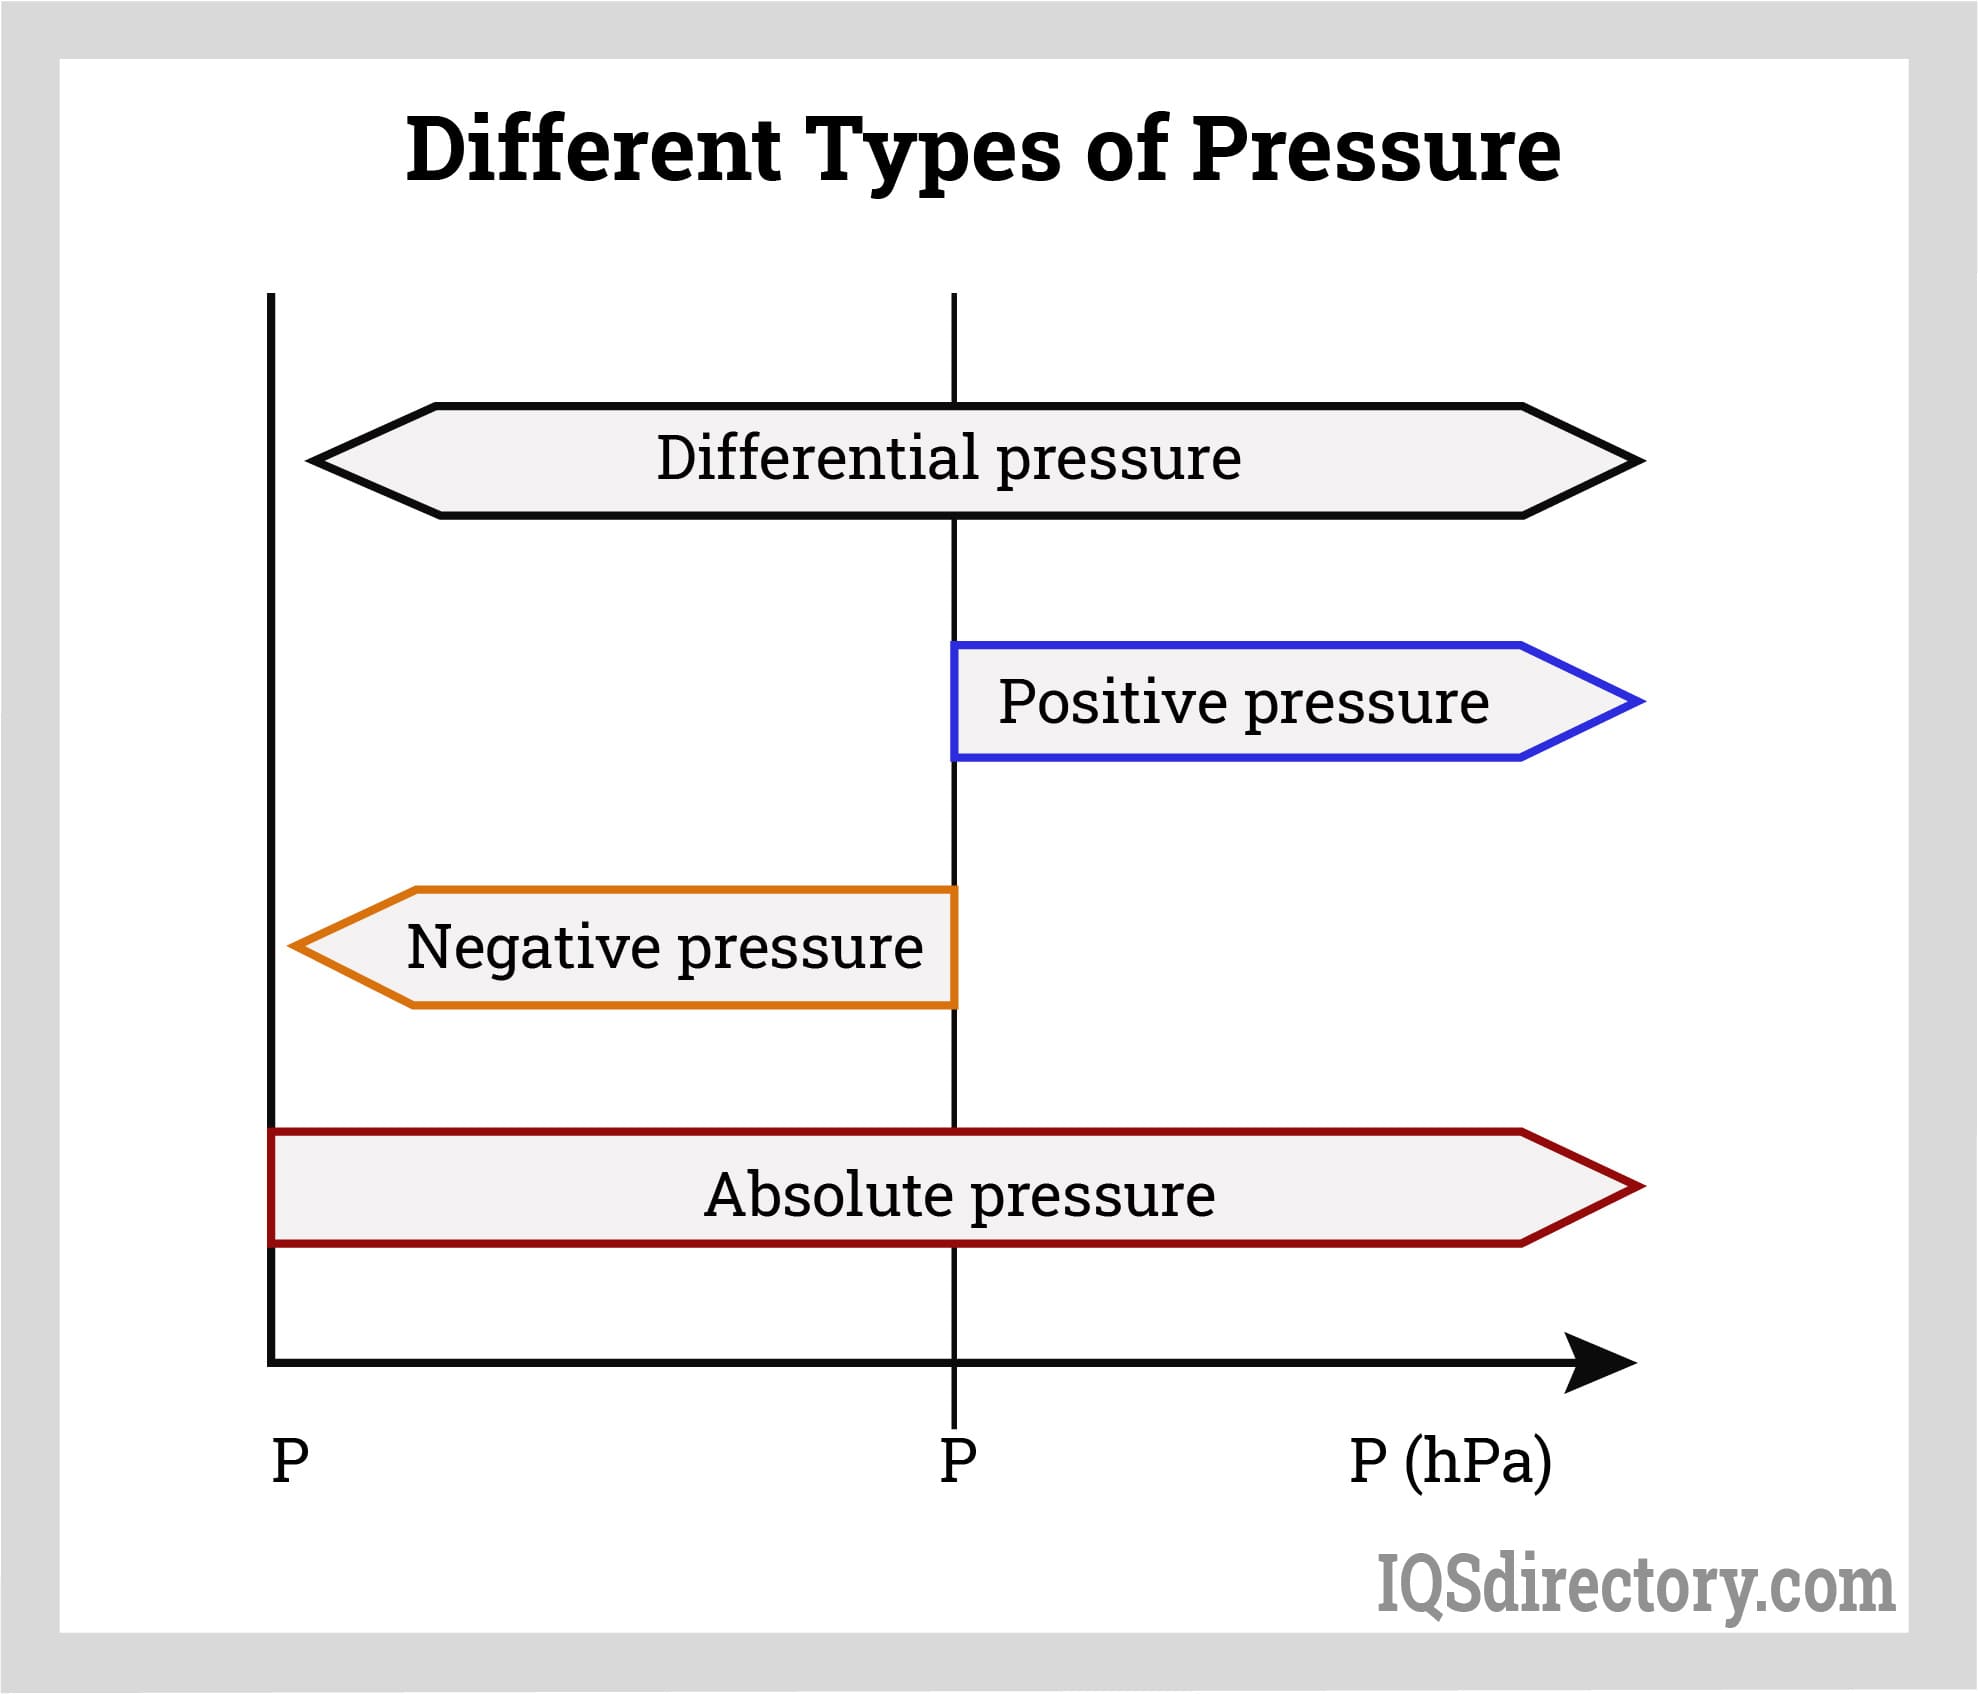 Different Types of Pressure